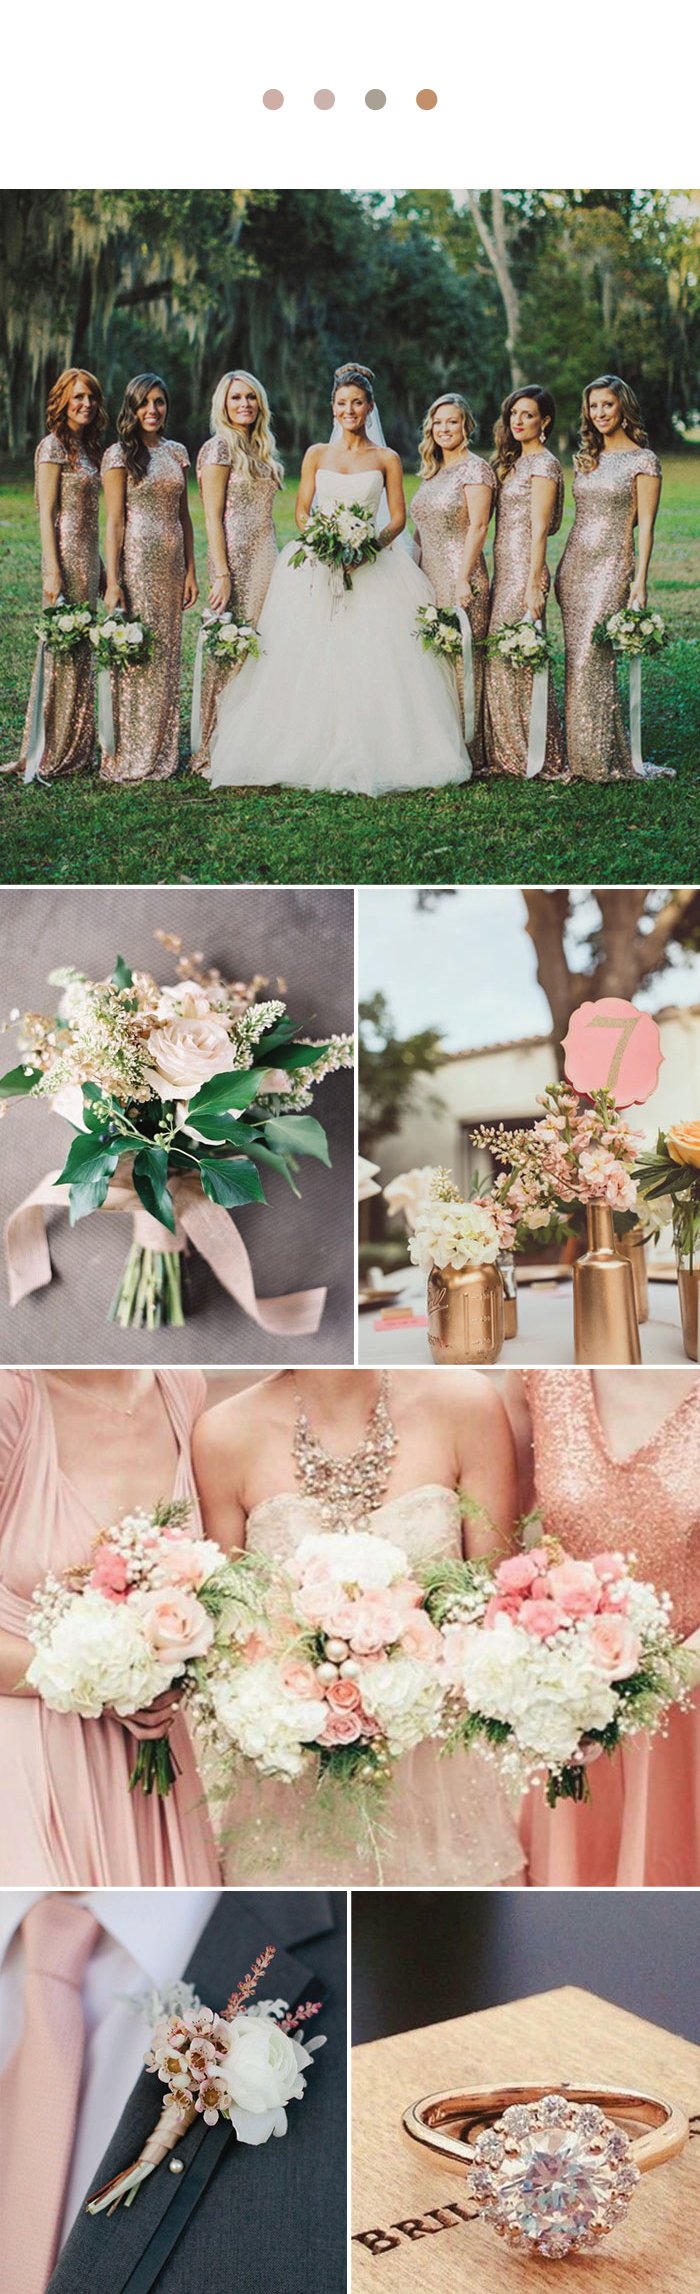 Weddings Ideas for Rose Gold